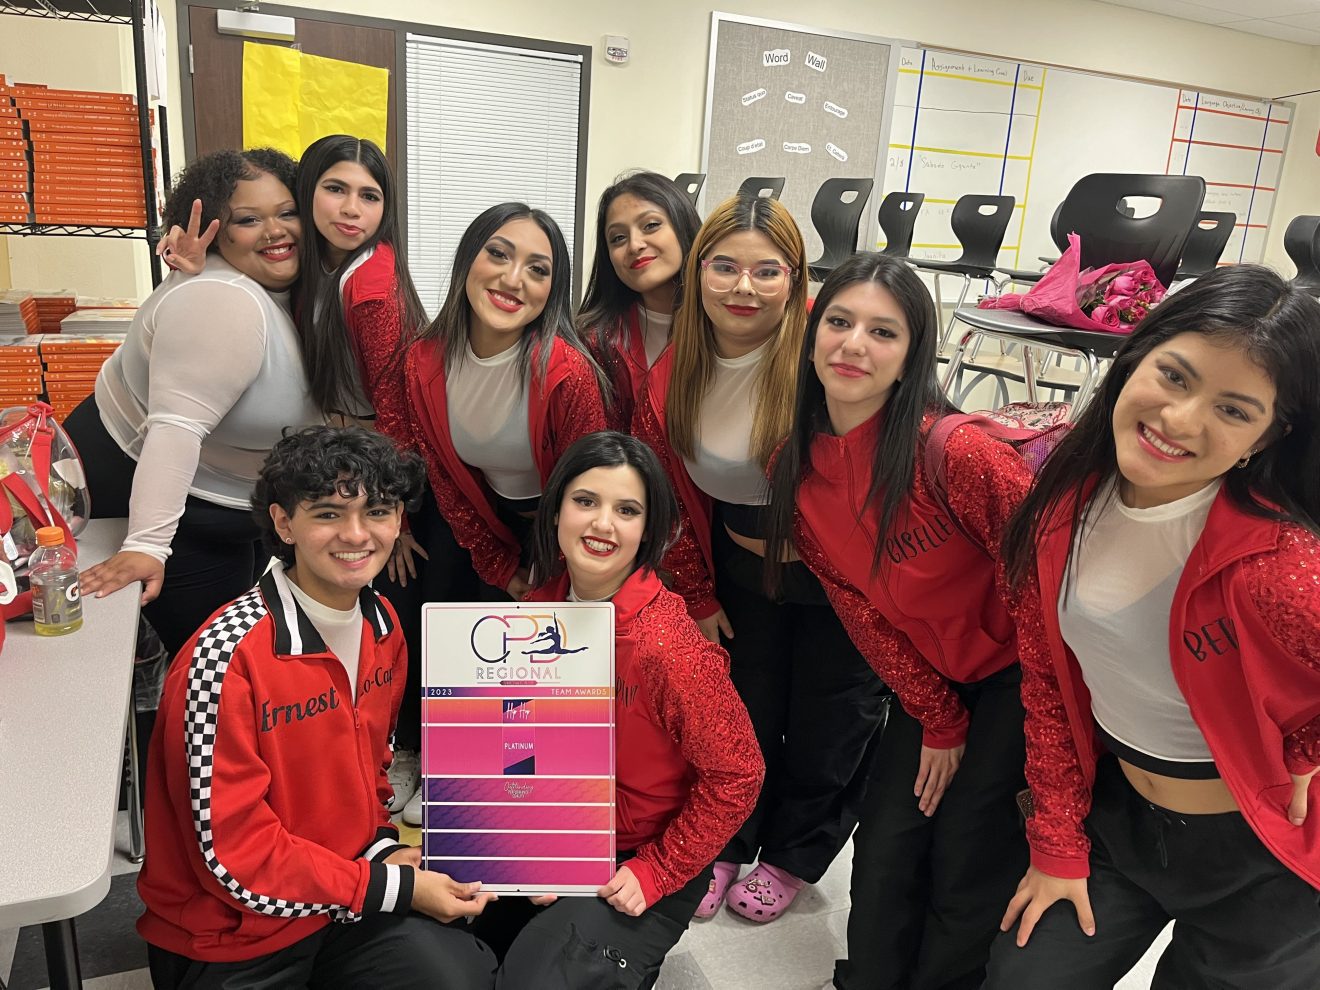 Southside High School's Red Jackets Receive Platinum Score at Dance Contest